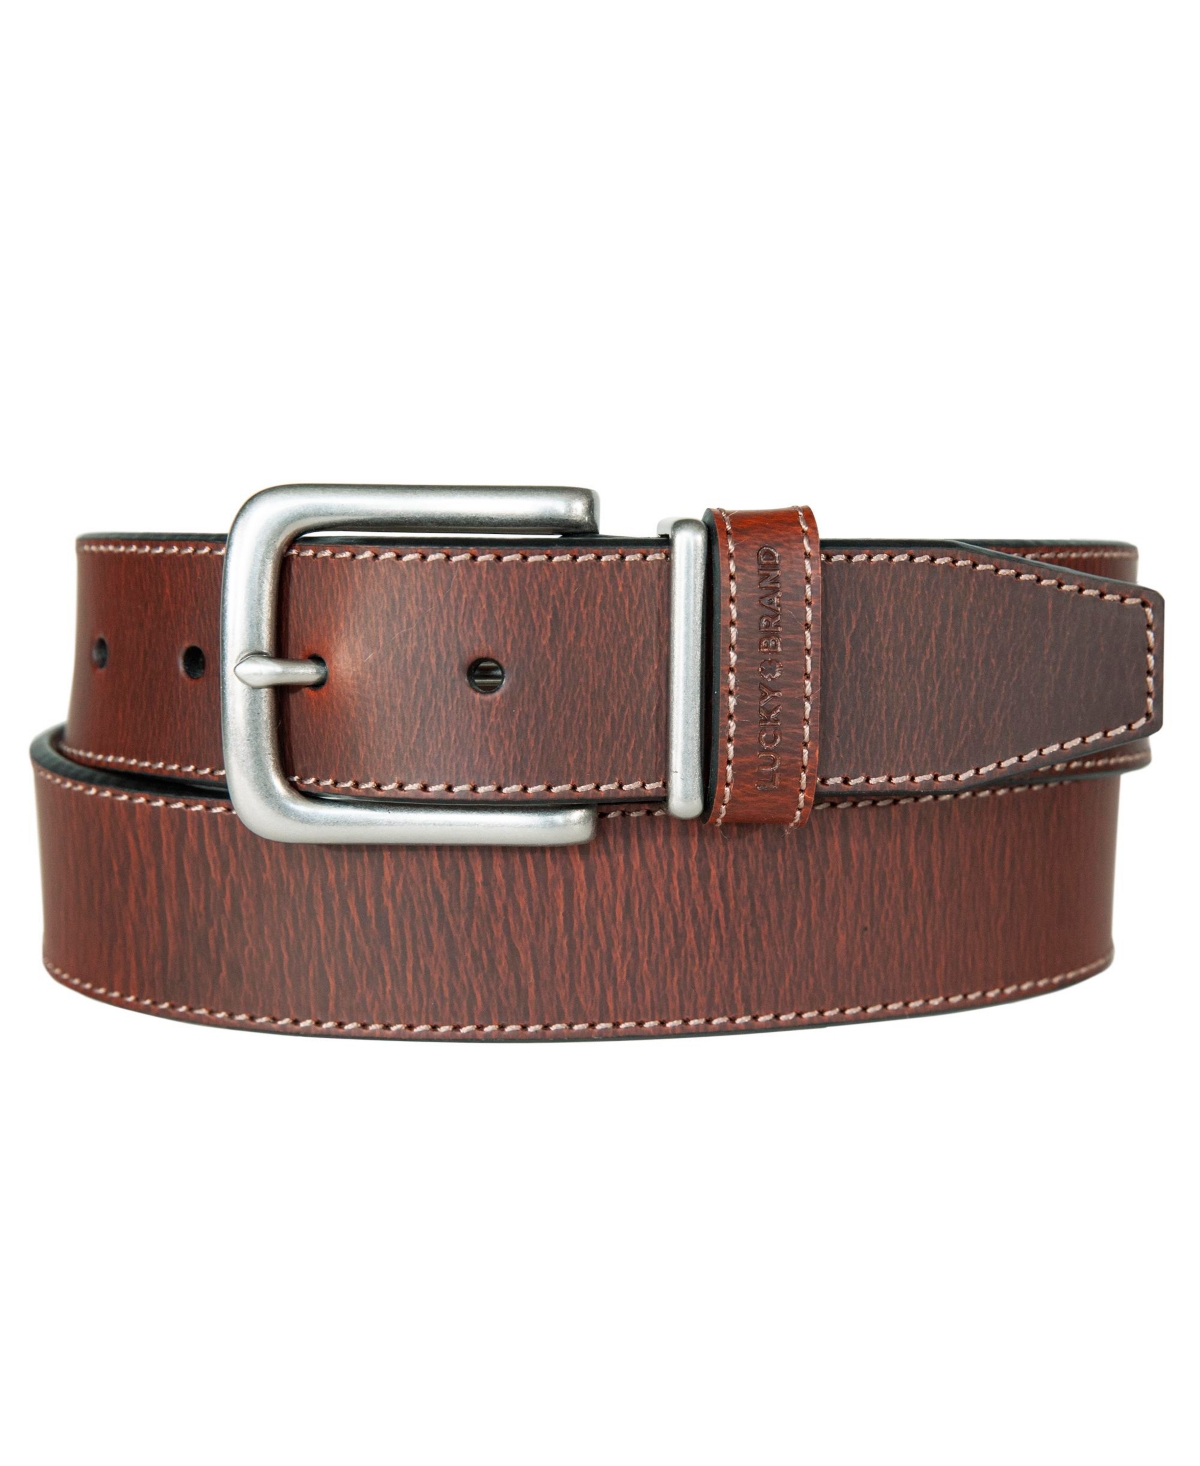 Men's Leather Jean Belt with Metal and Leather Keeper - Tan